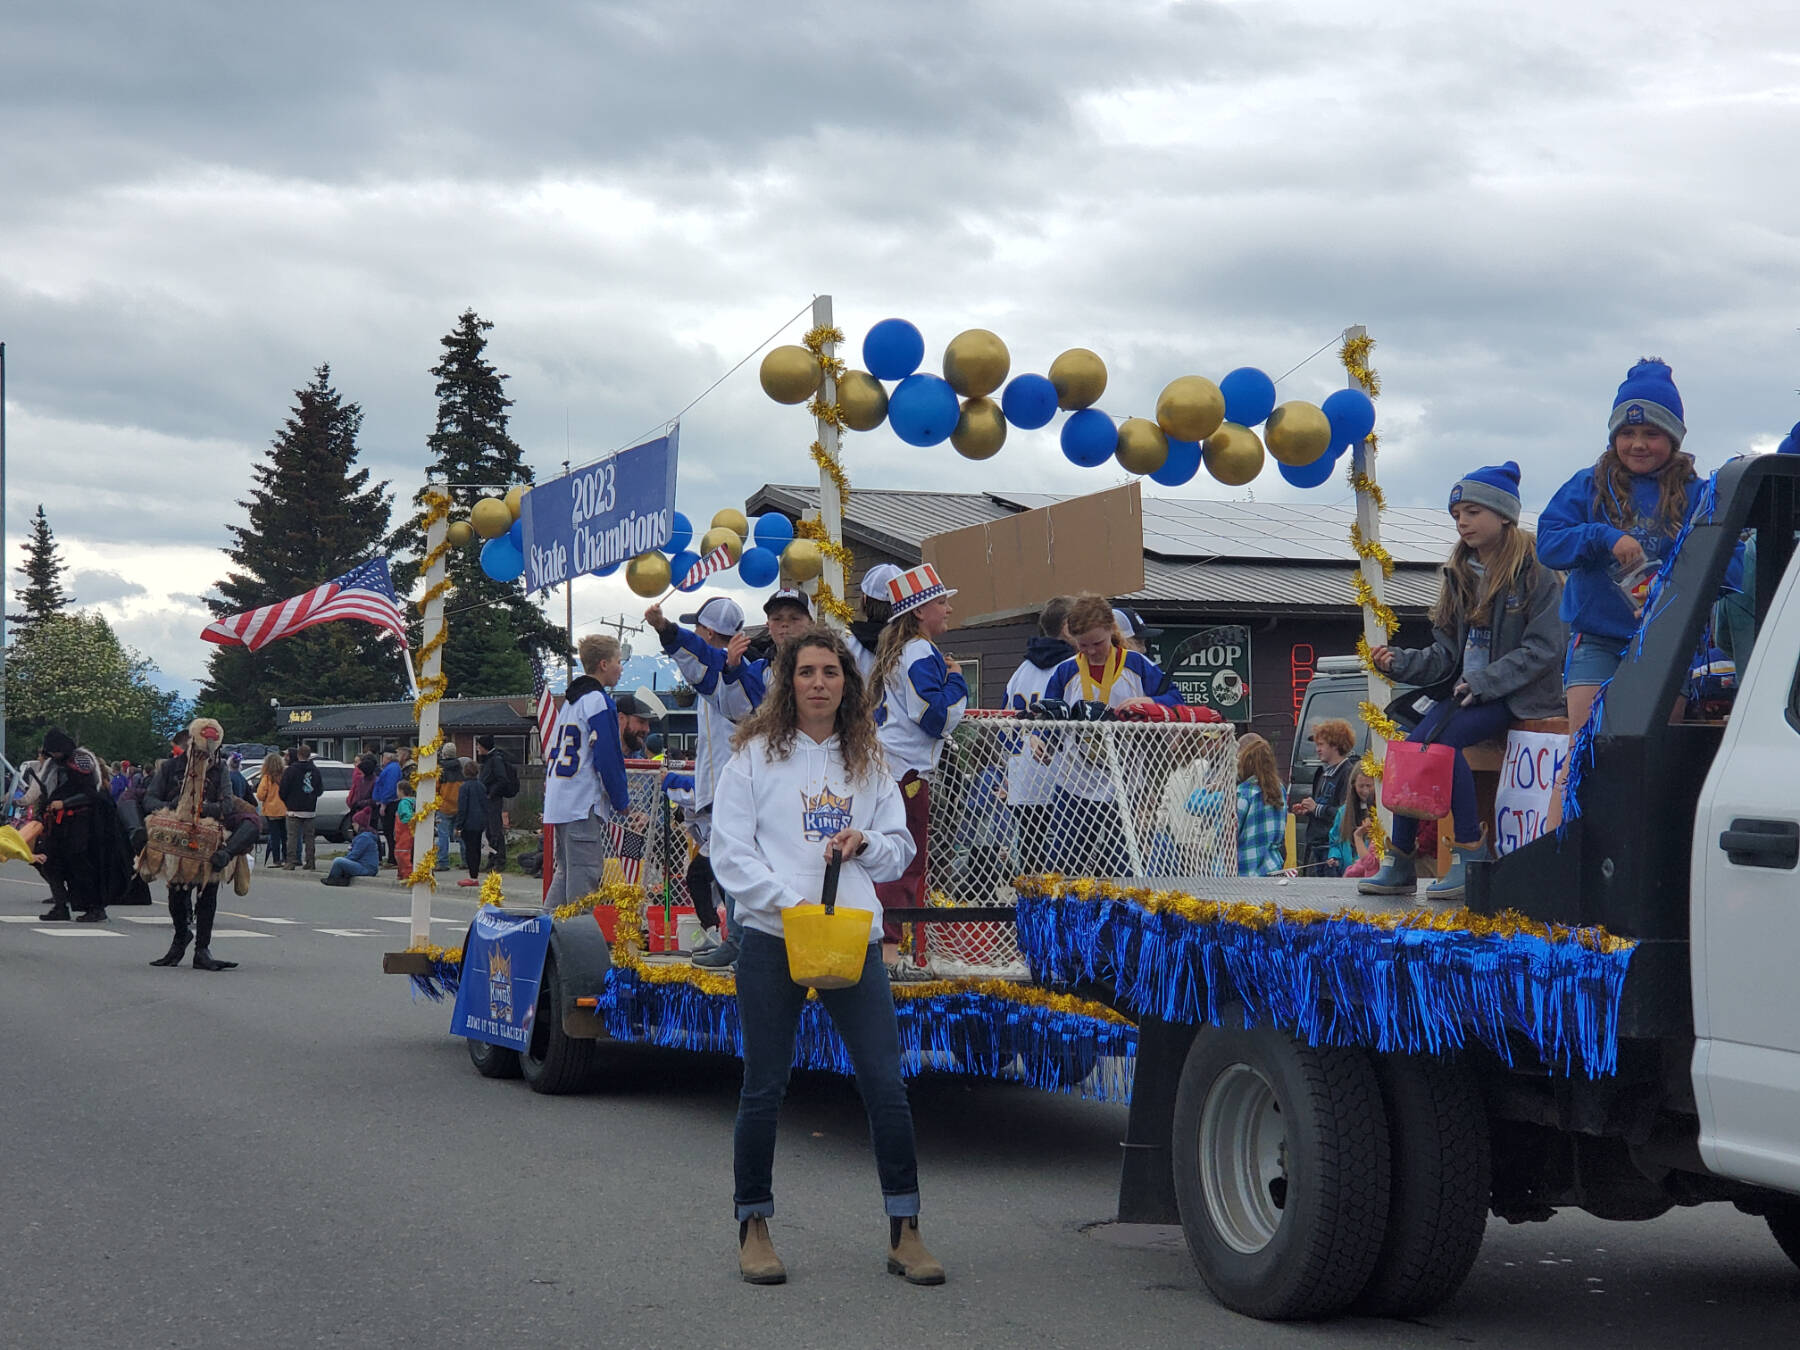 The Homer Glacier Kings’ float, which won a prize as the Best Children’s Group, travels down Pioneer Avenue during the “Seas the Day” Fourth of July parade on Tuesday, July 4, 2023 in Homer, Alaska. (Delcenia Cosman/Homer News)